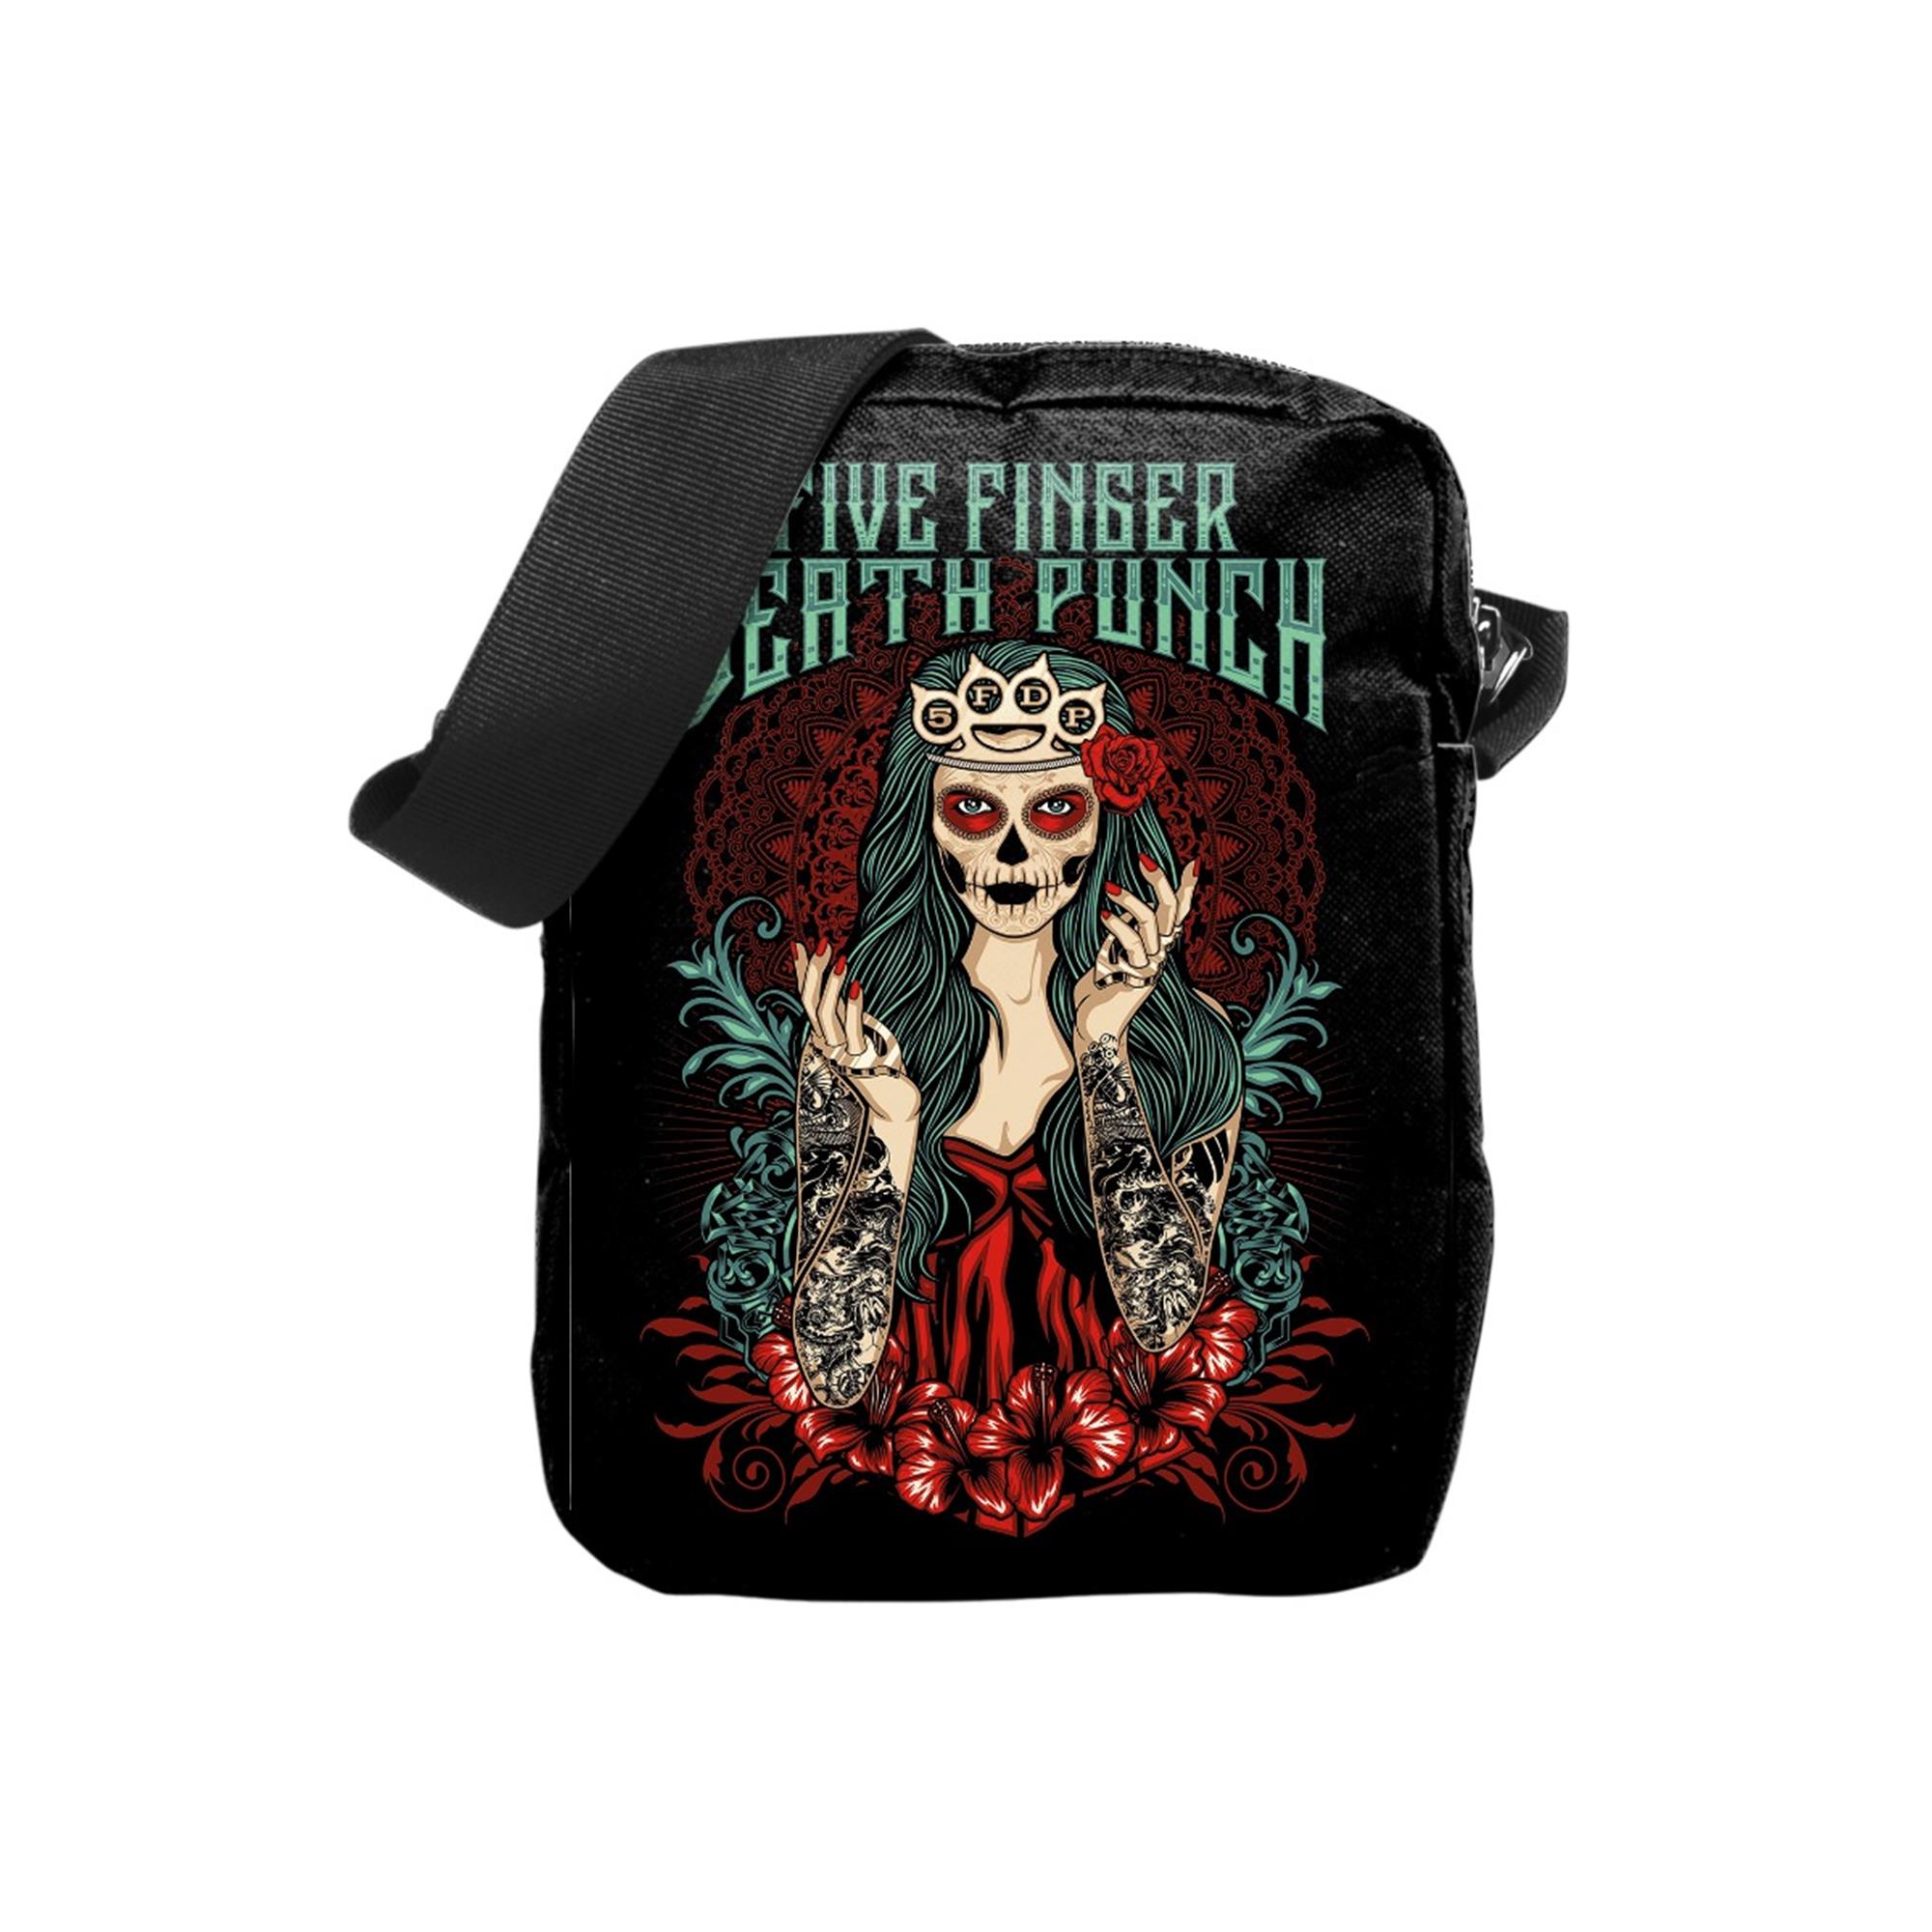 Five Finger Death Punch Day Of The Dead Crossbody Bag